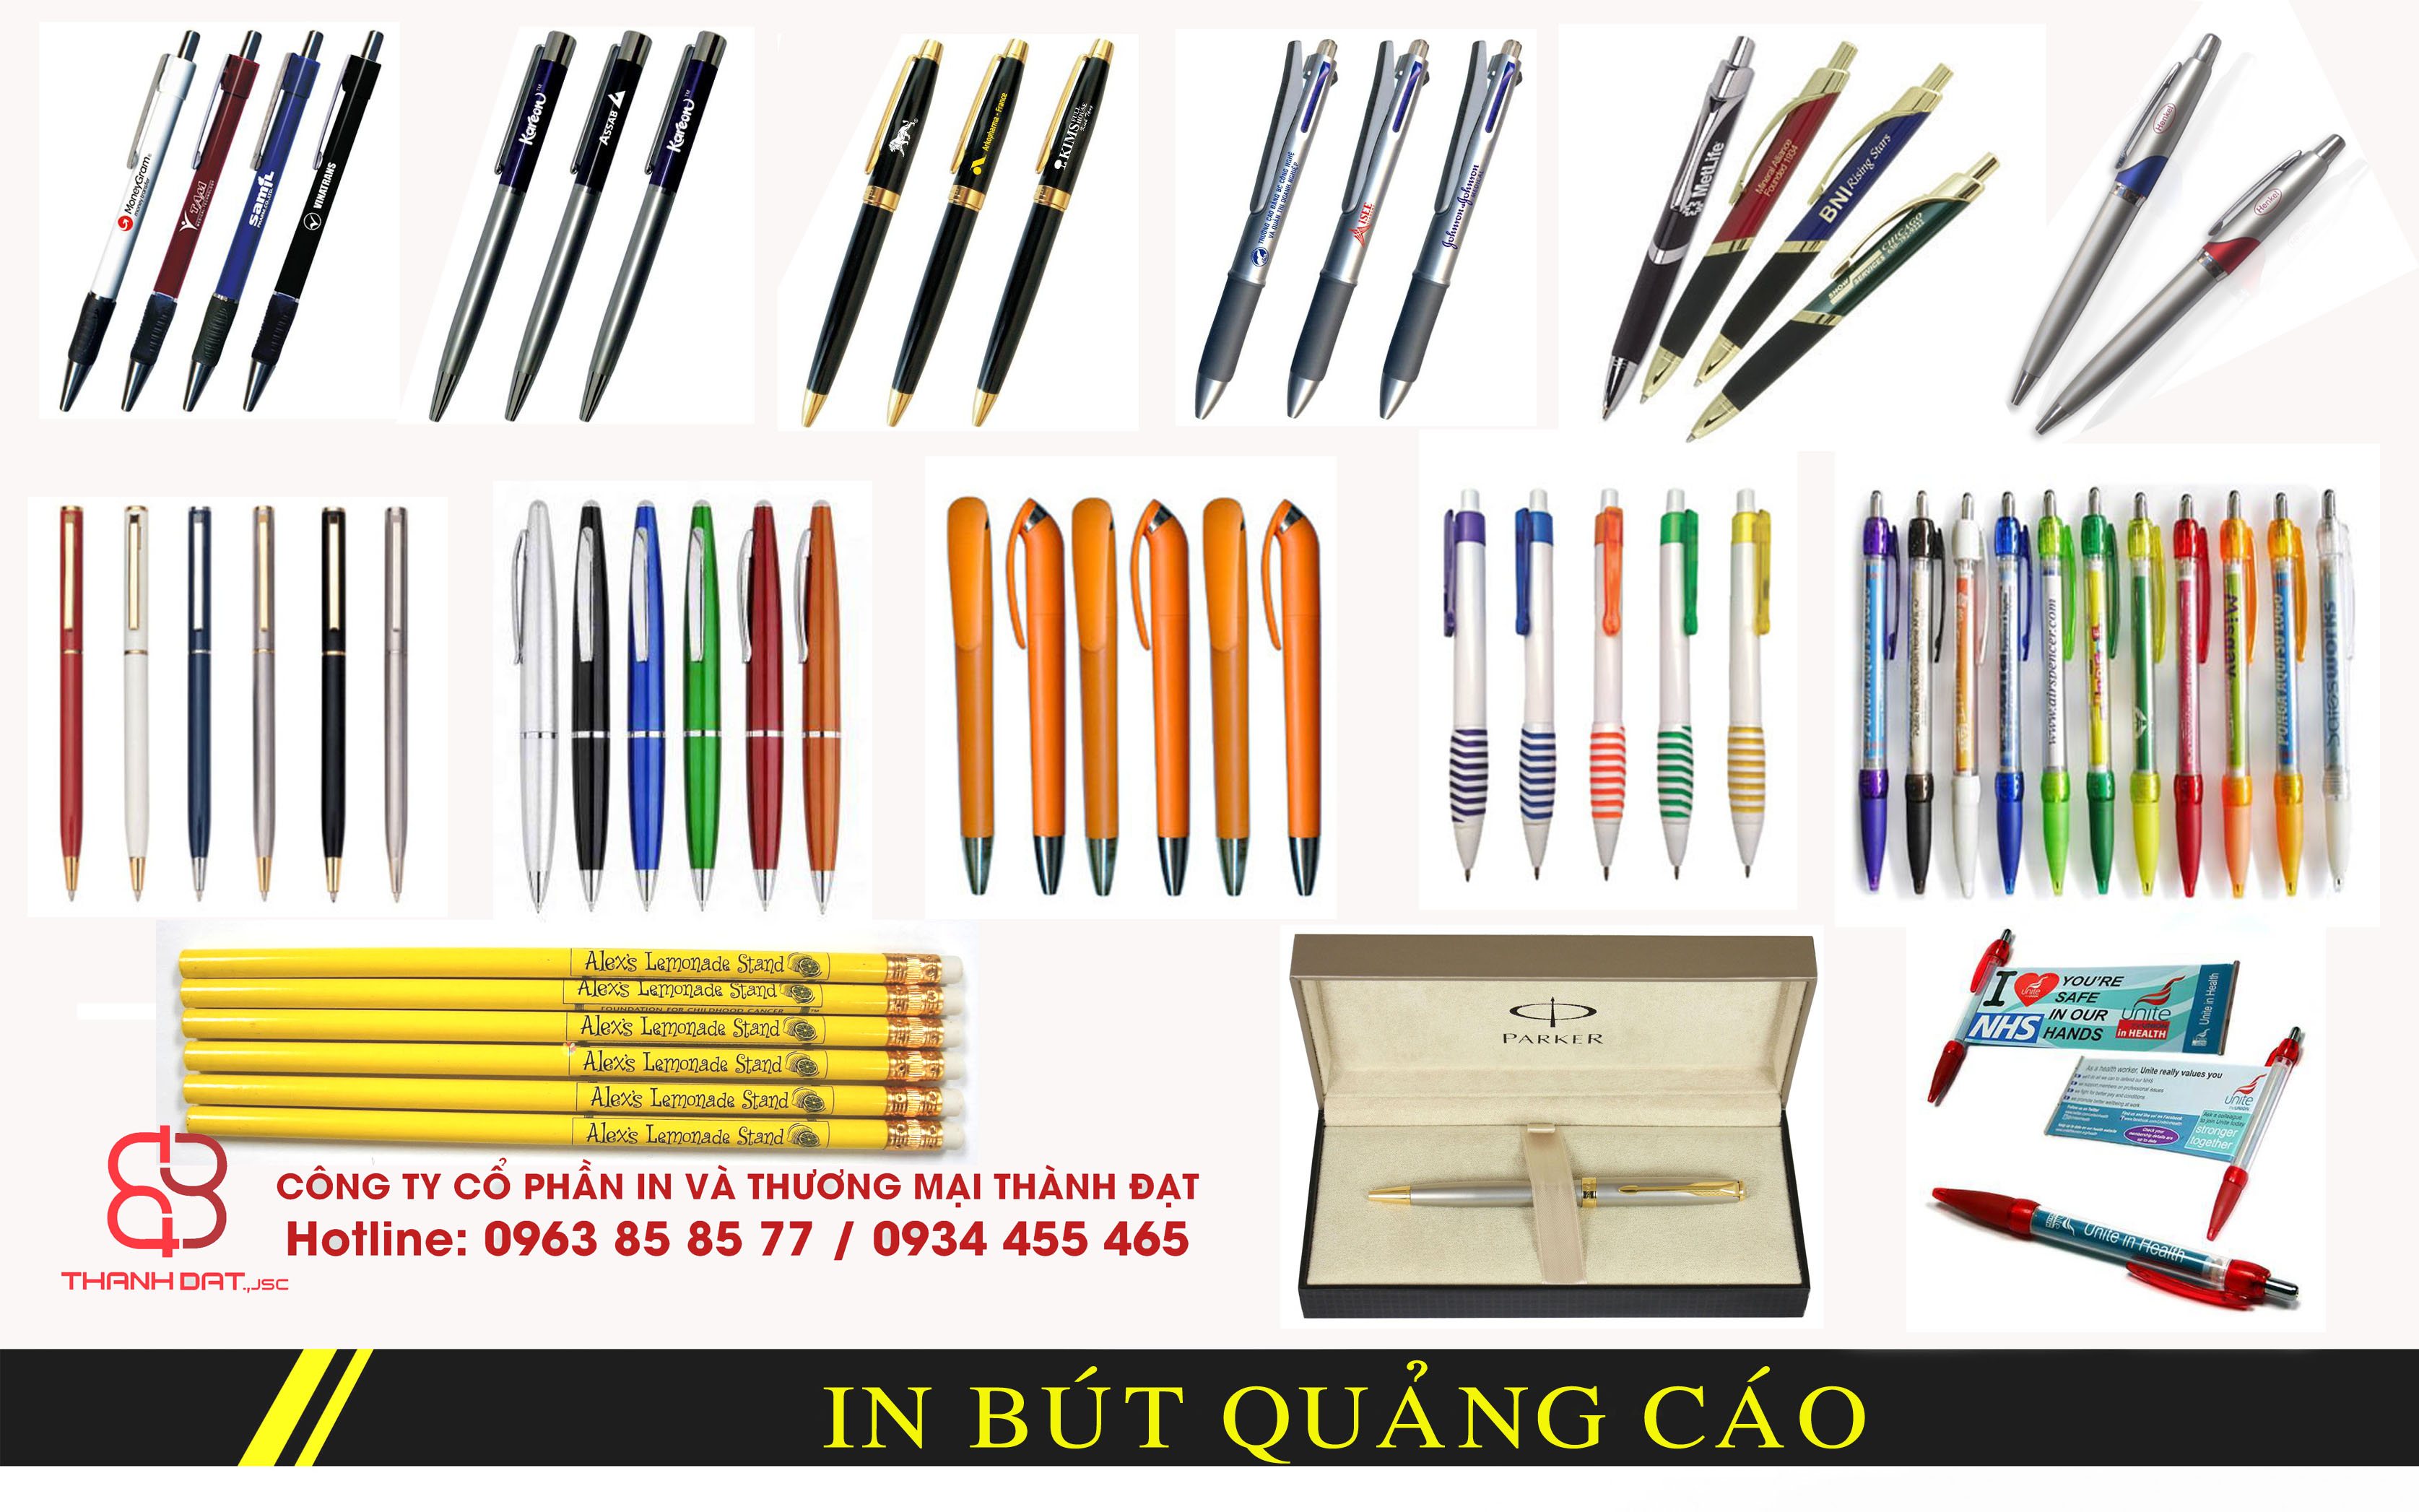 in but quang cao gia re